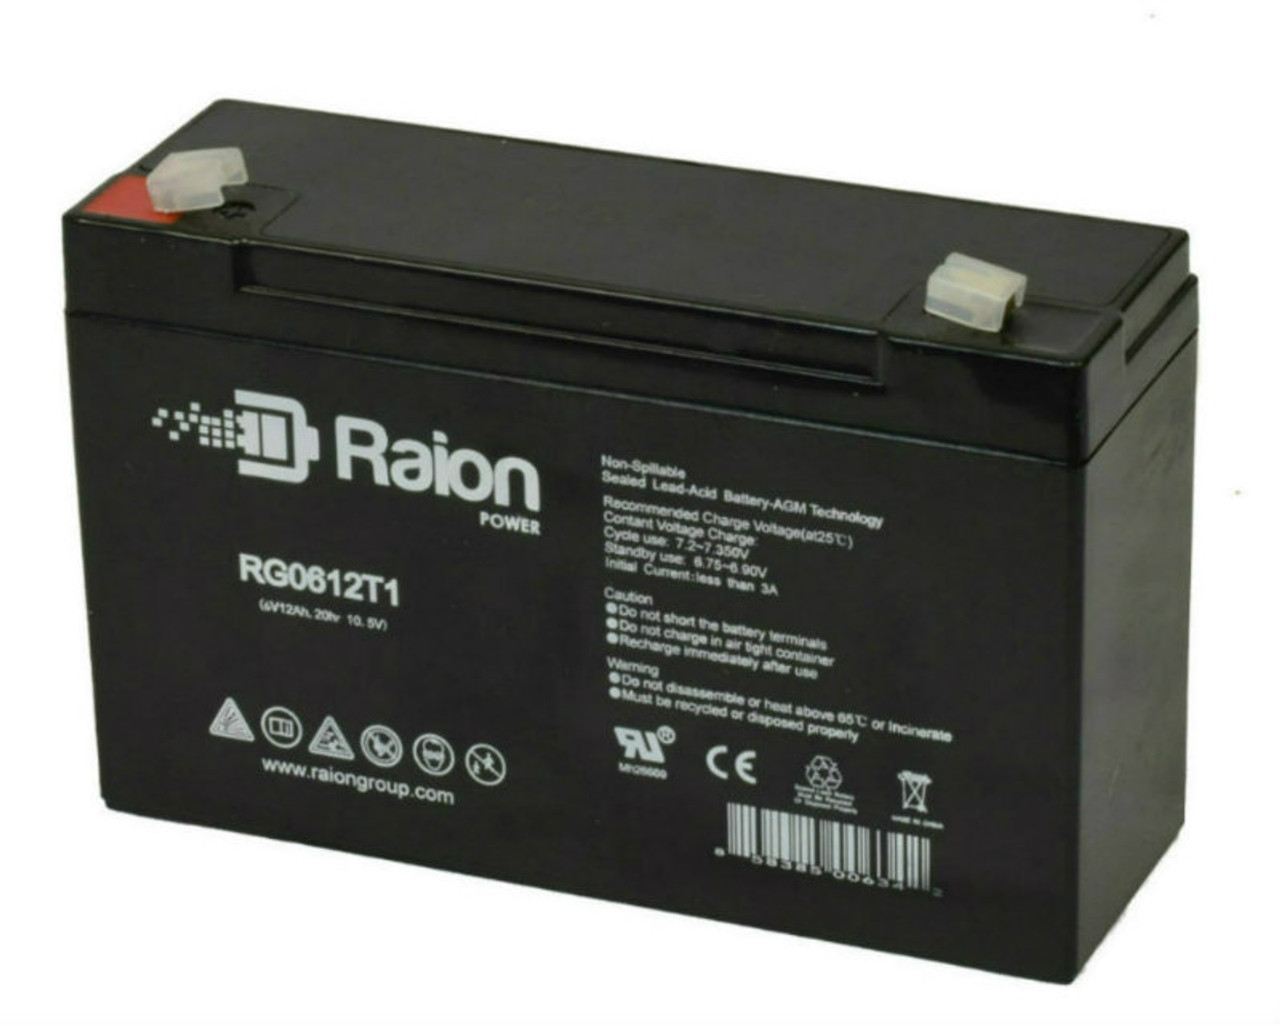 Raion Power RG06120T1 Replacement Battery for Champion NP12-6